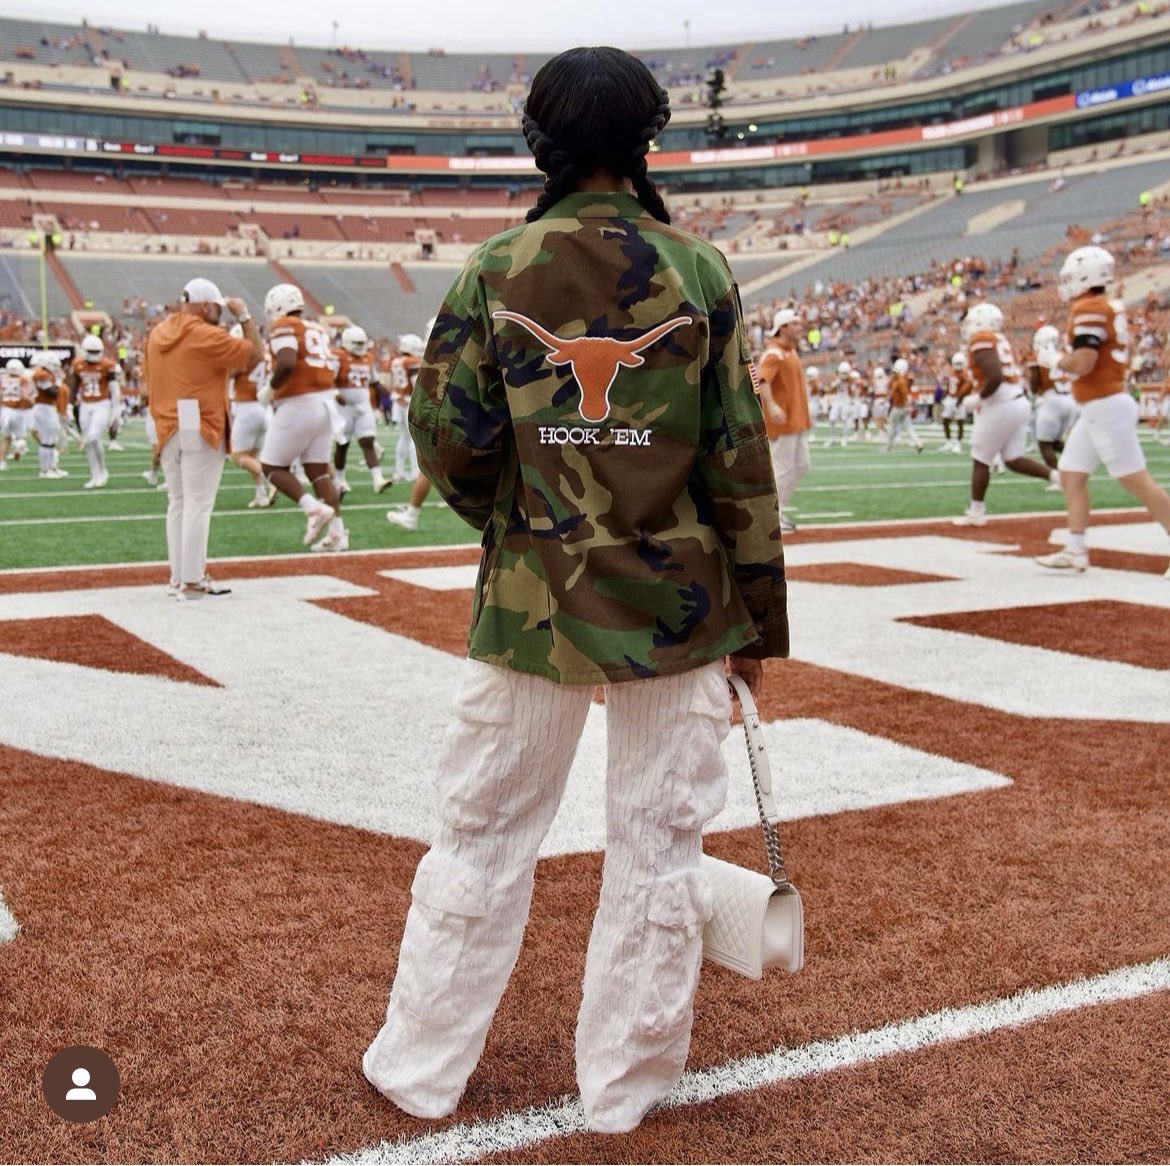 Excited to see @TexasFootball and @LorealSarkisian SALUTE those who have selflessly served our nation. #SaluteDesigns #vintagecamo #HookEm #Longhorns  🤘🏻